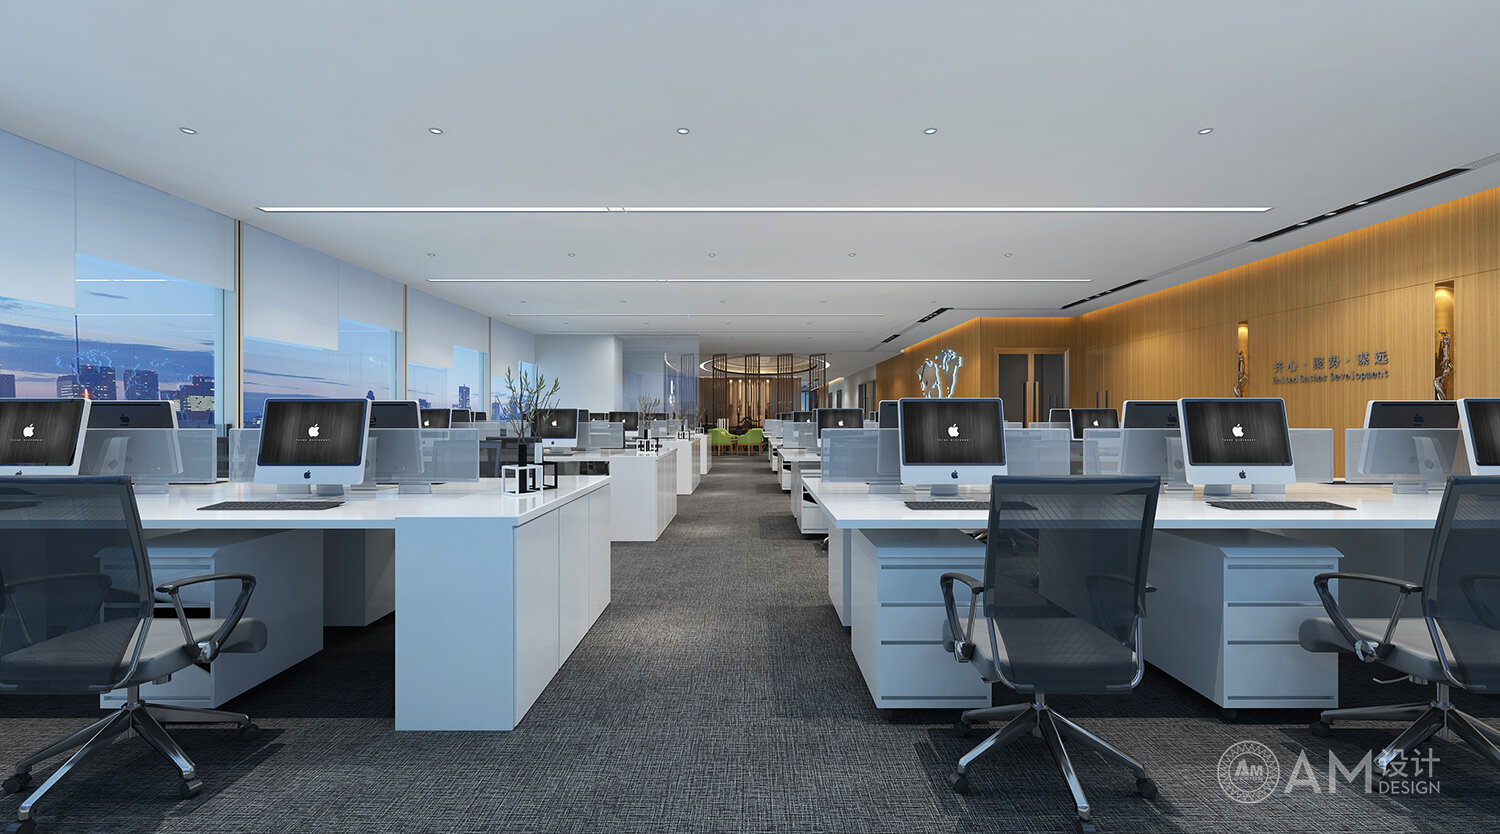 AM | Office area design of the headquarters office building of King Group